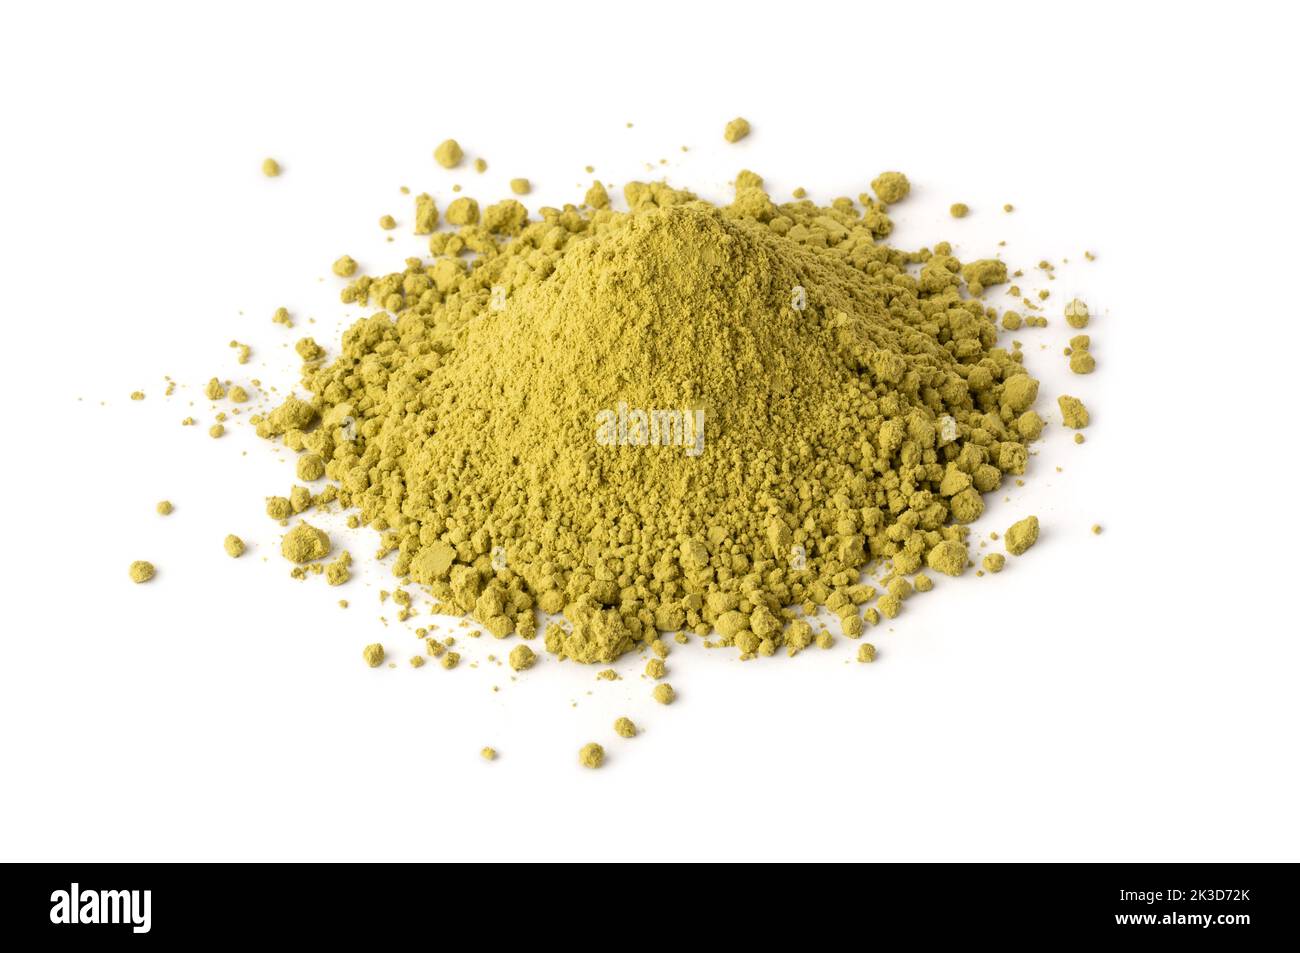 heap of dry henna powder, lawsonia inermis, powdered leaves from henna tree or mignonette or egyptian privet, dye preparing herb on white background Stock Photo